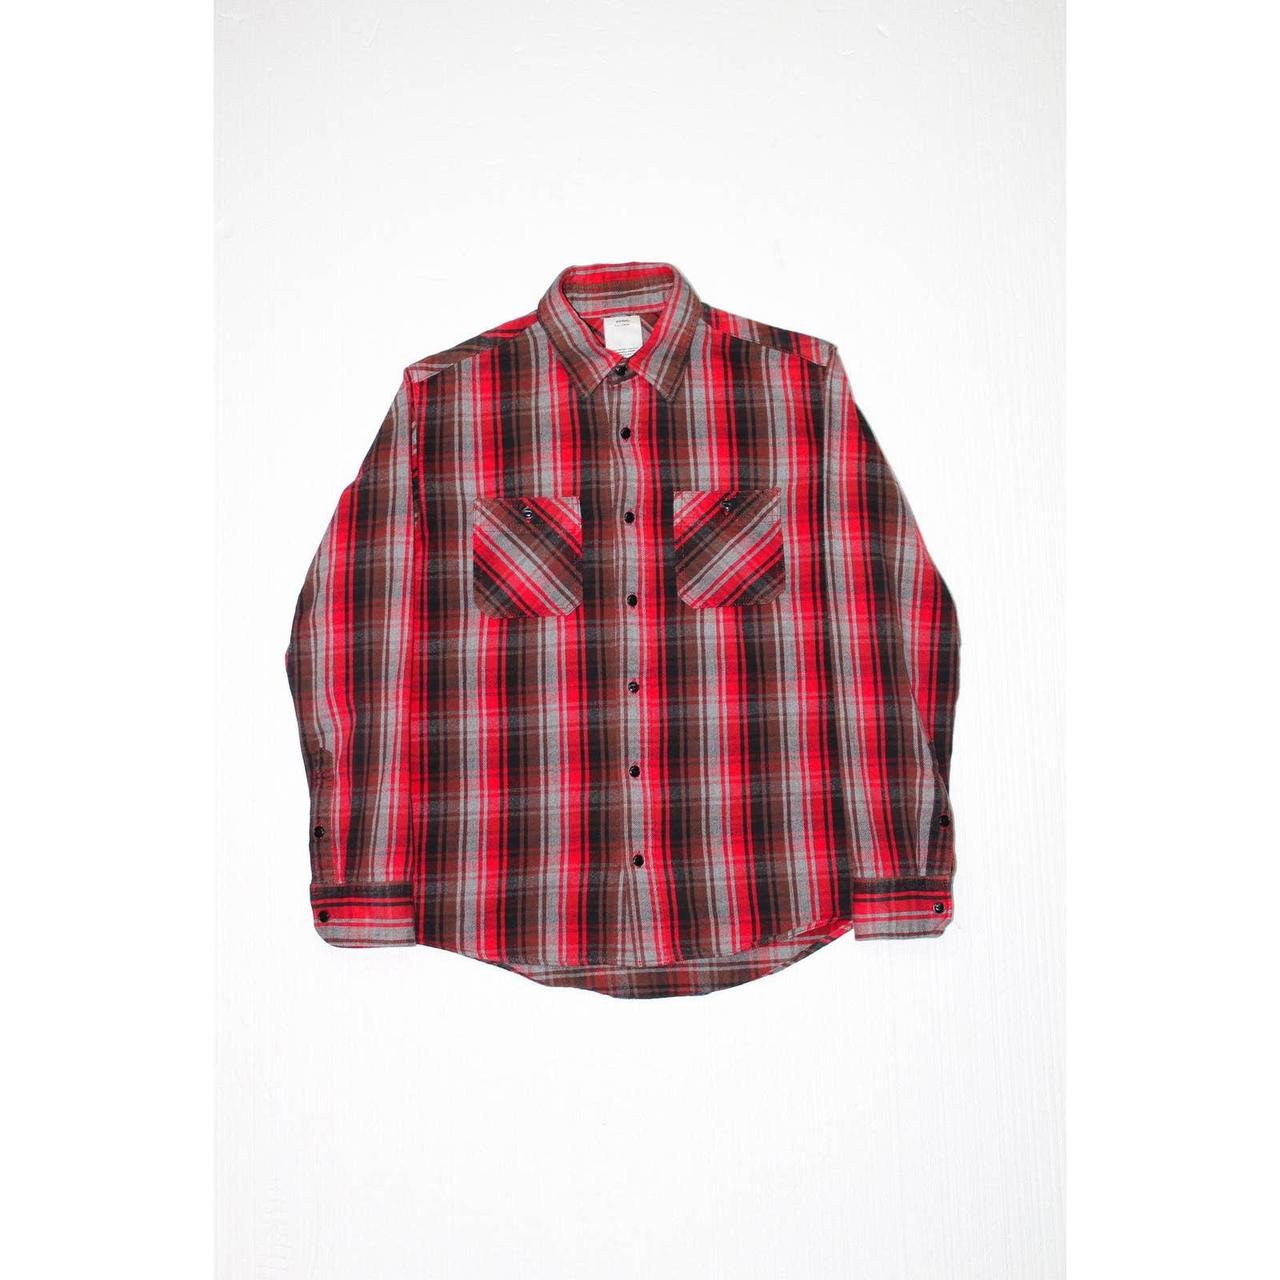 From Visvim comes the Black Elk Flannel in size 1....